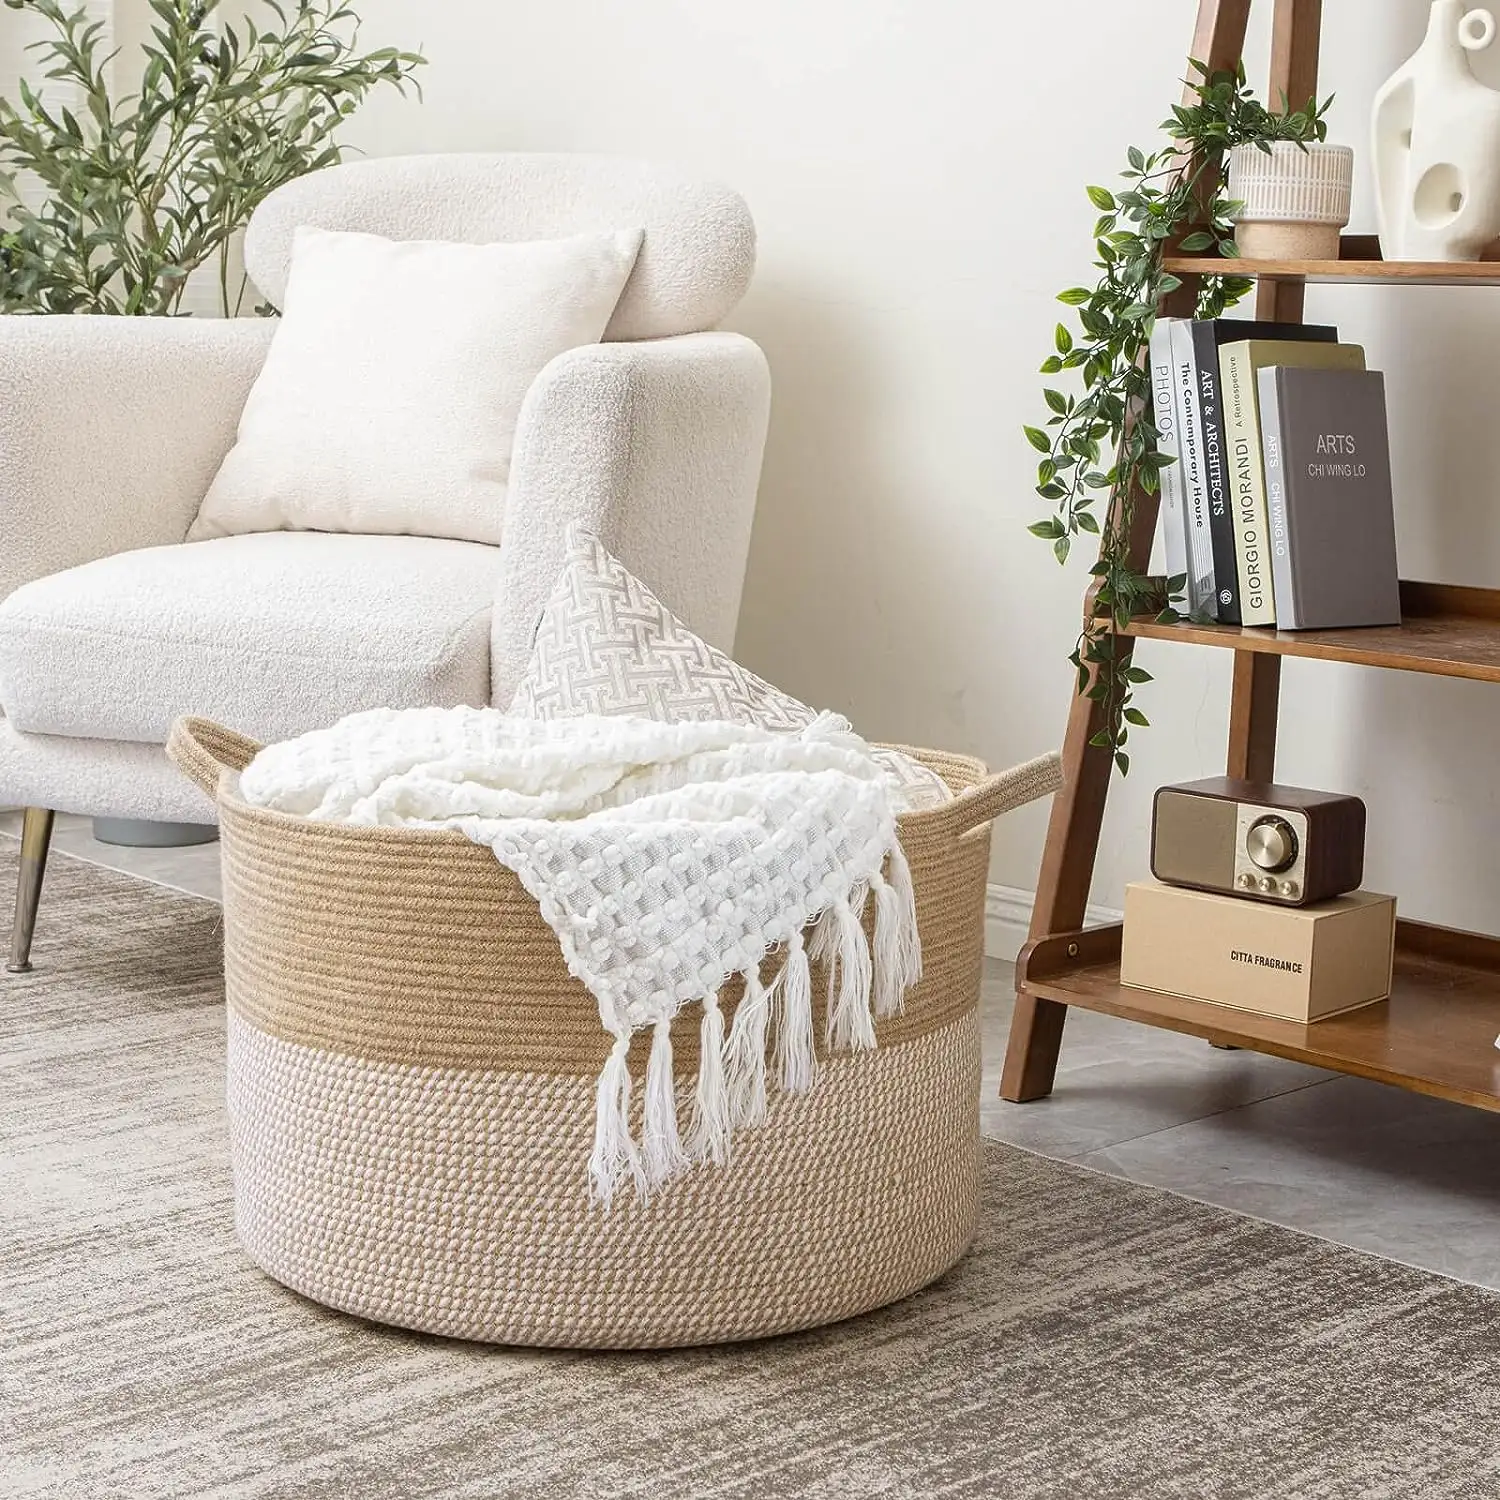 Large Blankets Wicker Basket Big Laundry Baskets Woven Basket with Handle for Clothes Pillows Towel Shoe